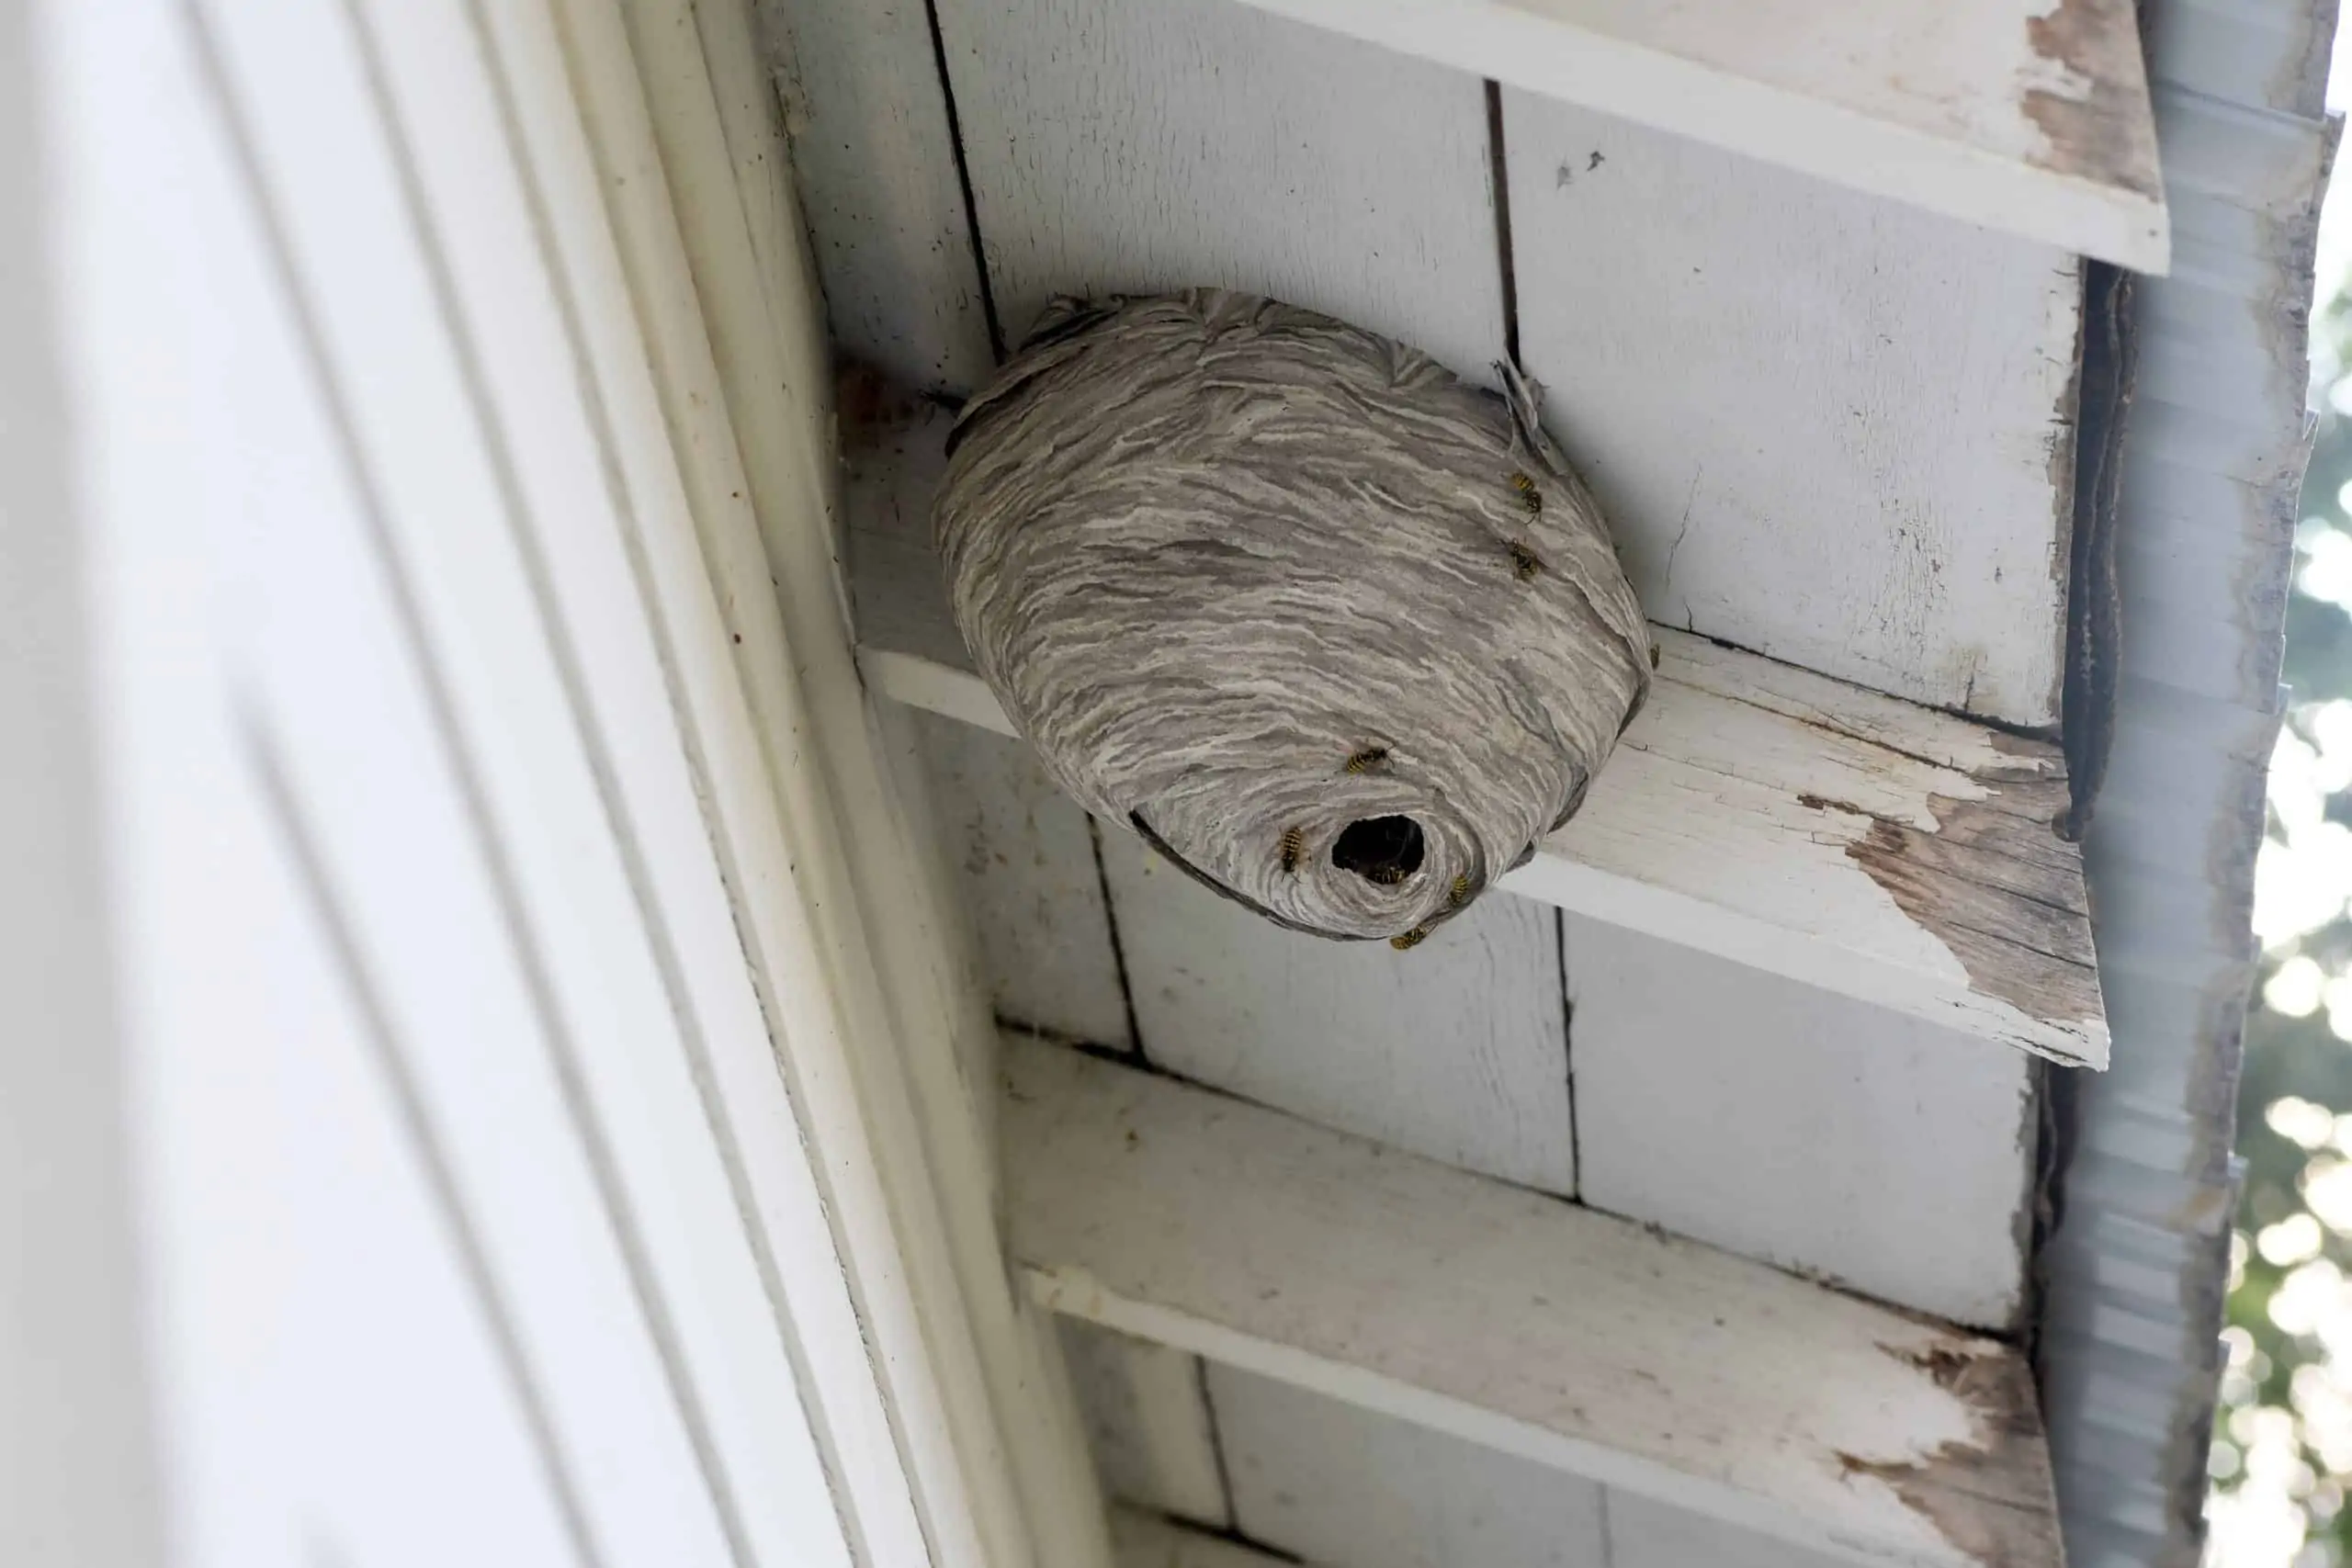 Home Services image is a wasp nest in the eaves of a homeowners roof.